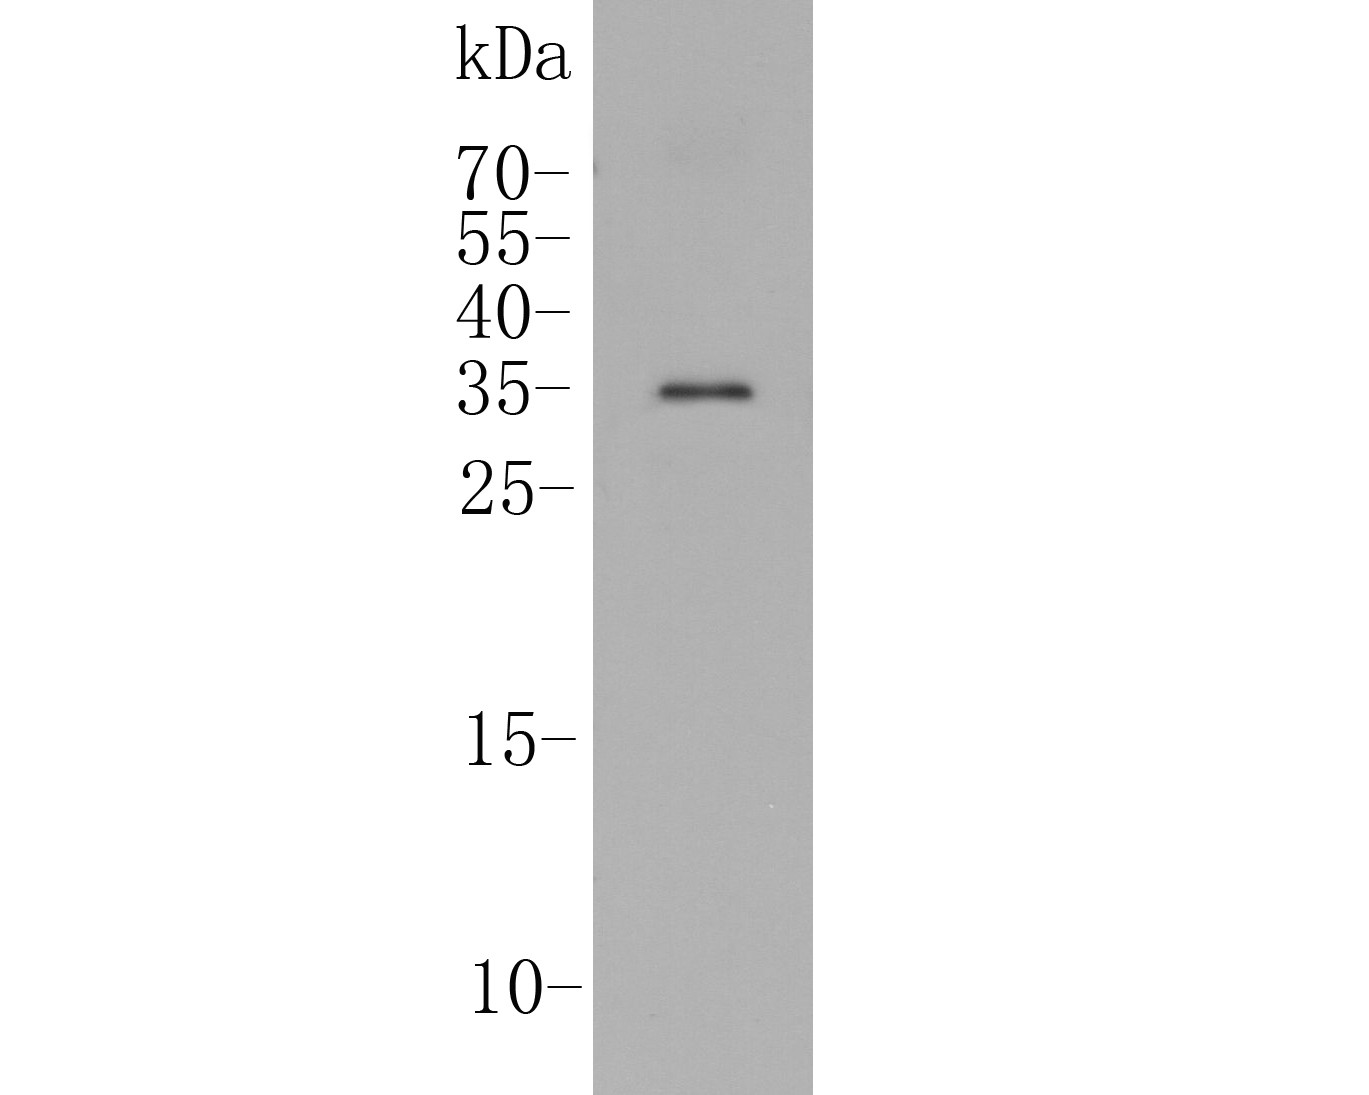 Western blot analysis of IL17A on Rat stomach tissue lysate. Proteins were transferred to a PVDF membrane and blocked with 5% BSA in PBS for 1 hour at room temperature. The primary antibody (ER1902-37, 1/500) was used in 5% BSA at room temperature for 2 hours. Goat Anti-Rabbit IgG - HRP Secondary Antibody (HA1001) at 1:5,000 dilution was used for 1 hour at room temperature.